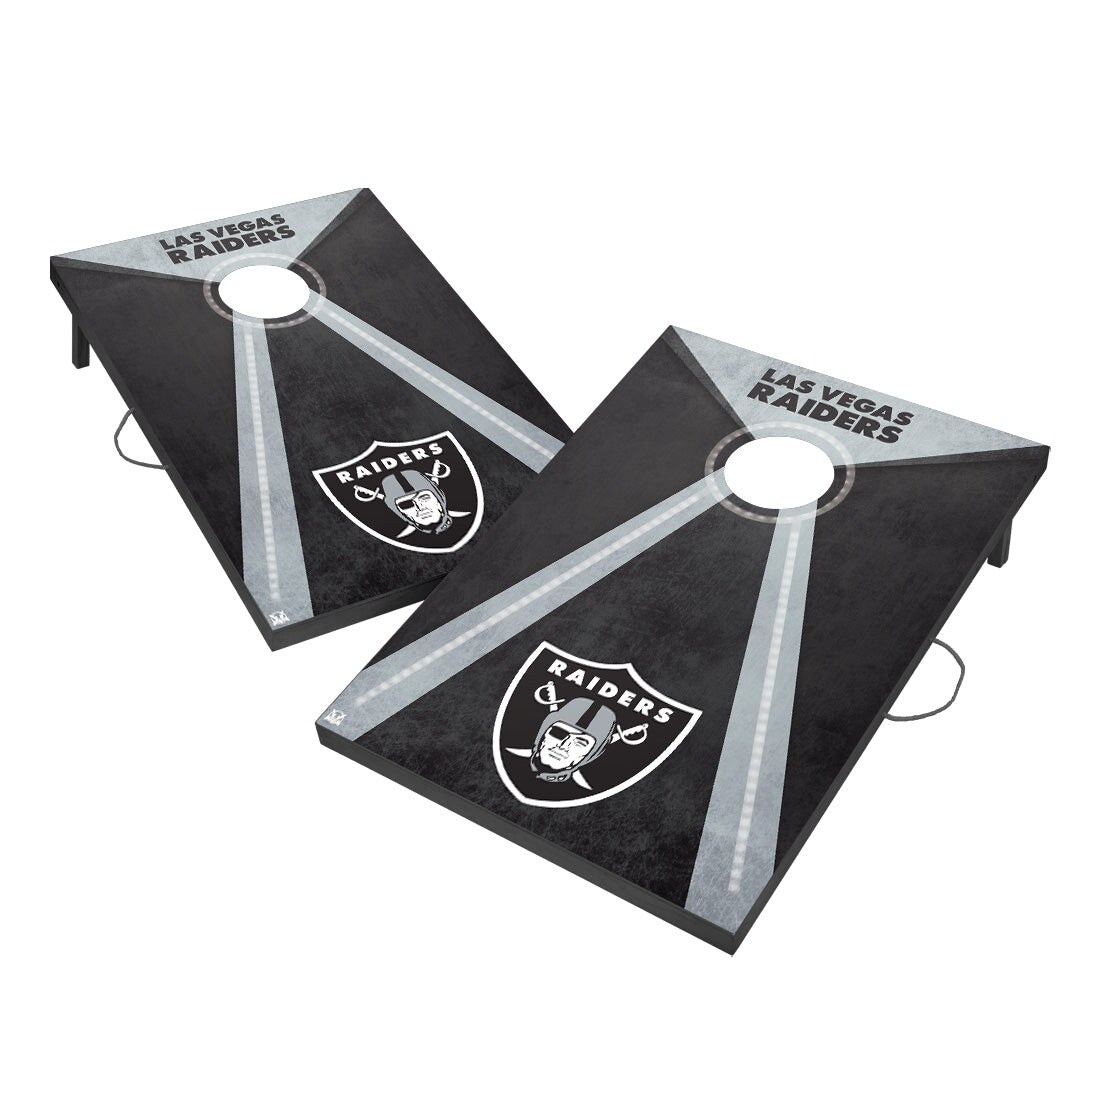 Wild Sports Las Vegas Raiders 2x3 Tailgate Toss NFL Outdoor Wood Composite  Corn Hole in the Party Games department at